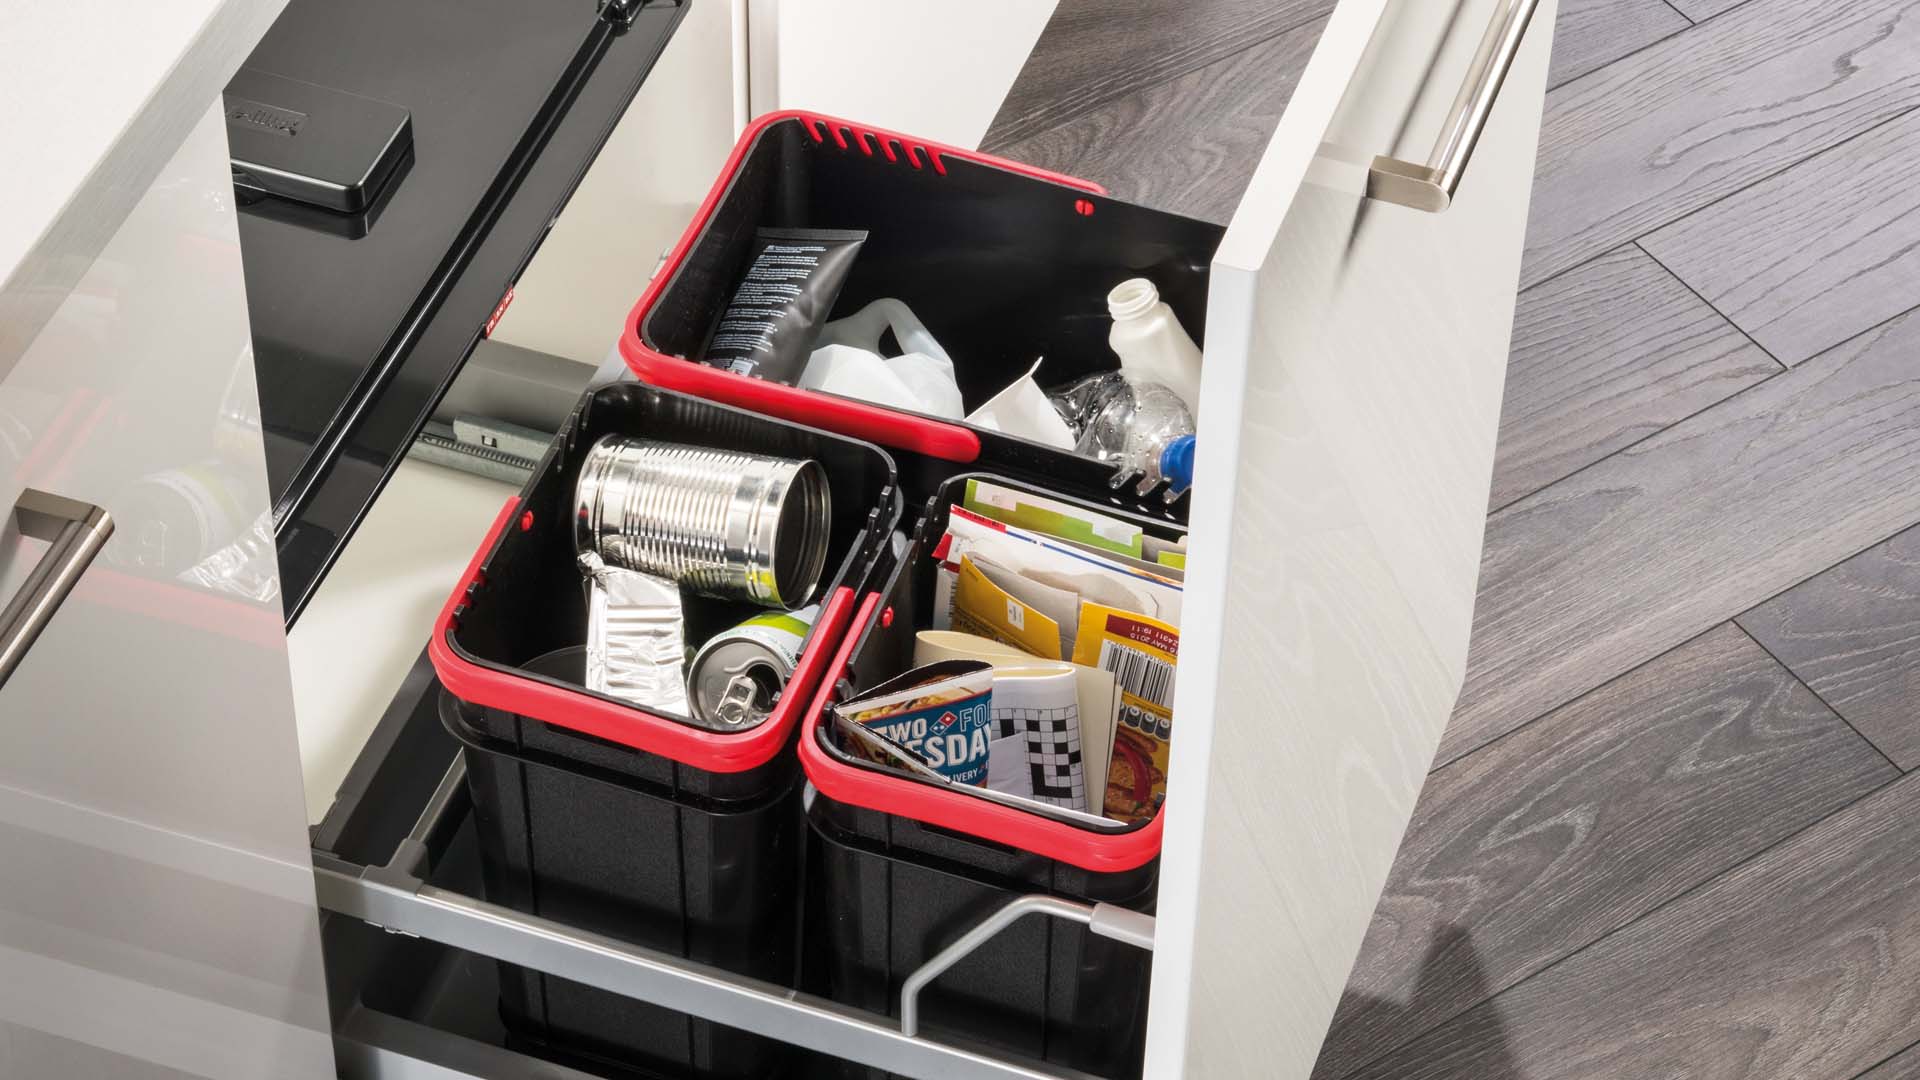 Keep rubbish off the floor and out of site with a system that lets you sort your recycling.